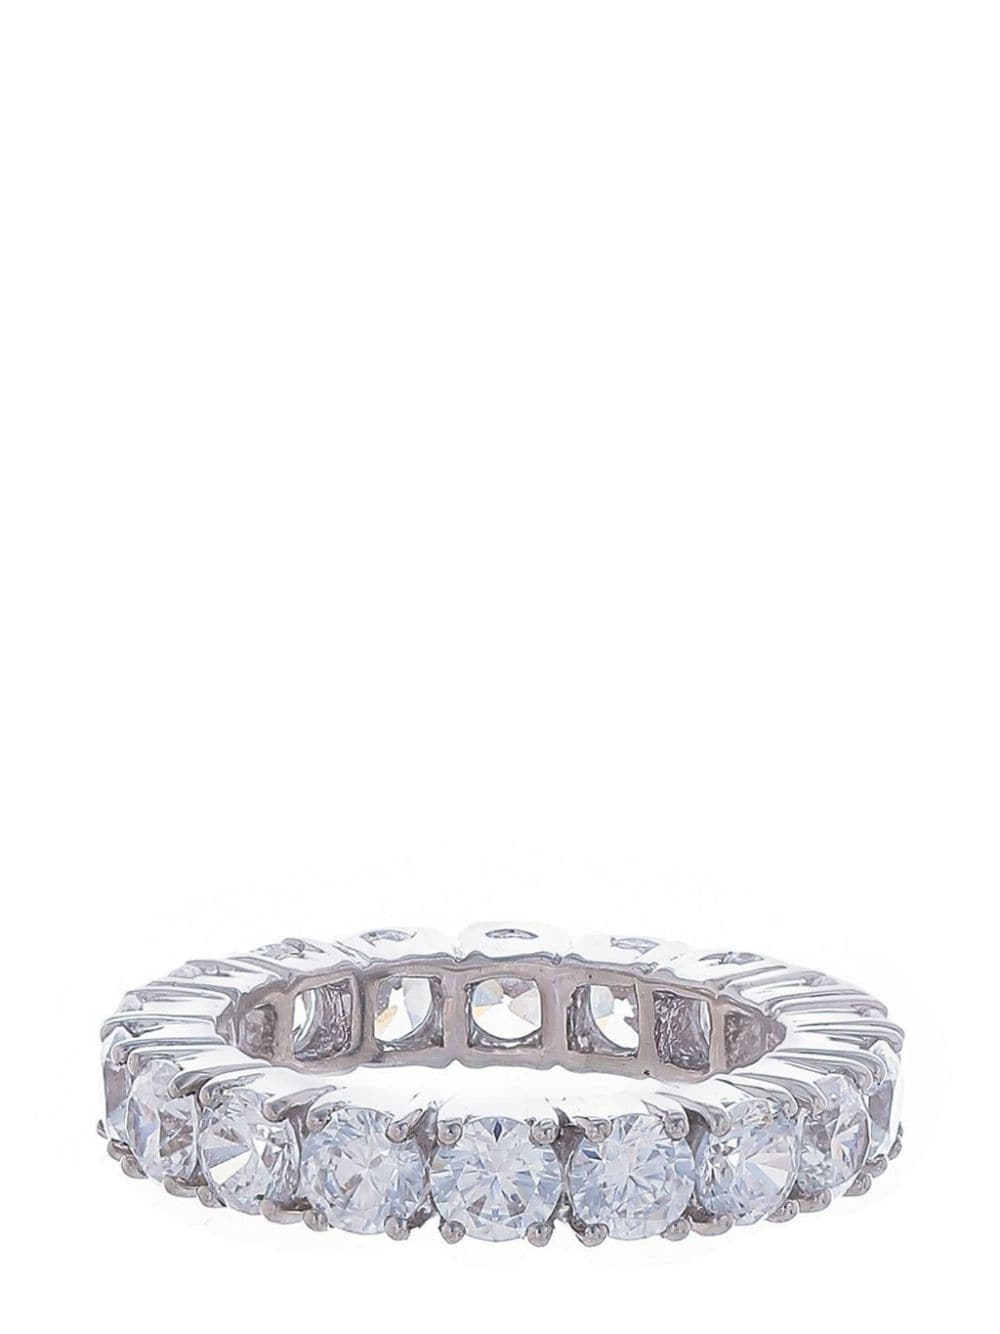 Image 1 of Fantasia by Deserio 14kt gold vermeil eternity band ring